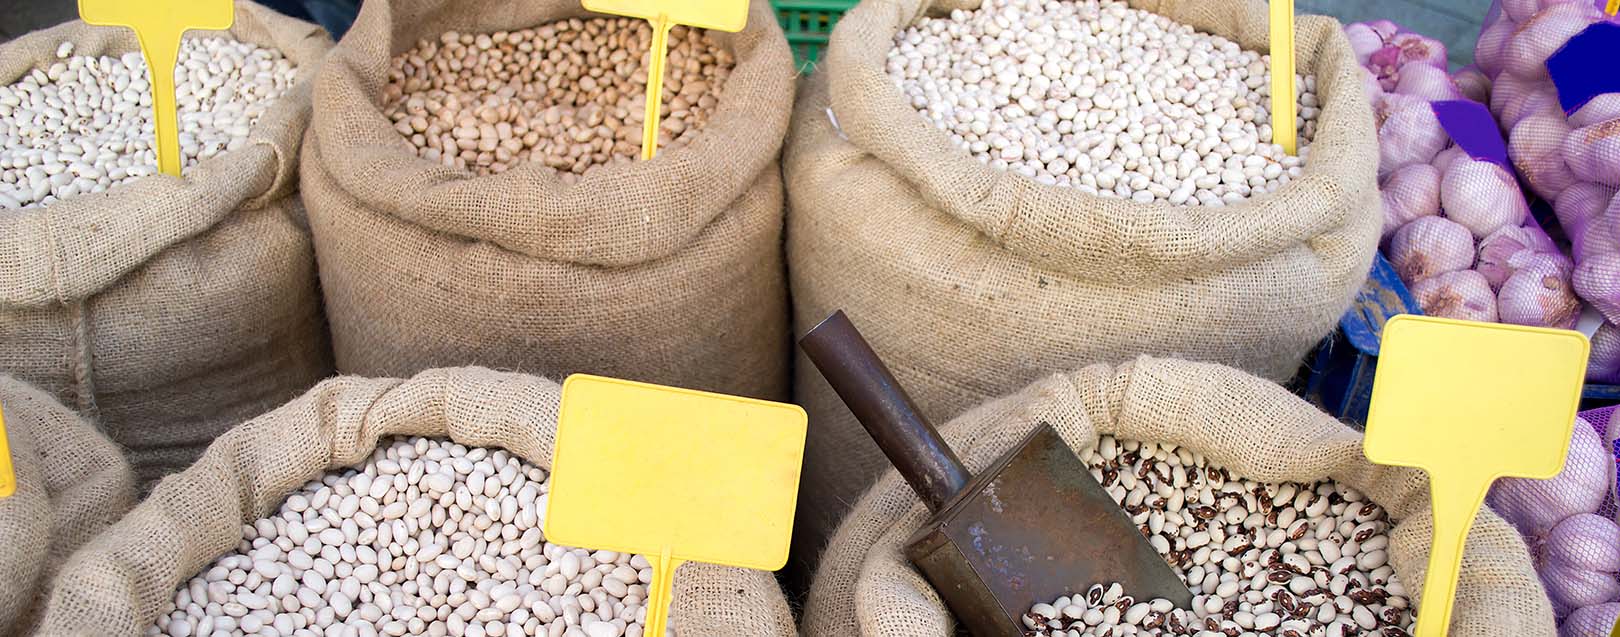 Govt procures 1.11 L tonnes of pulses for buffer stock